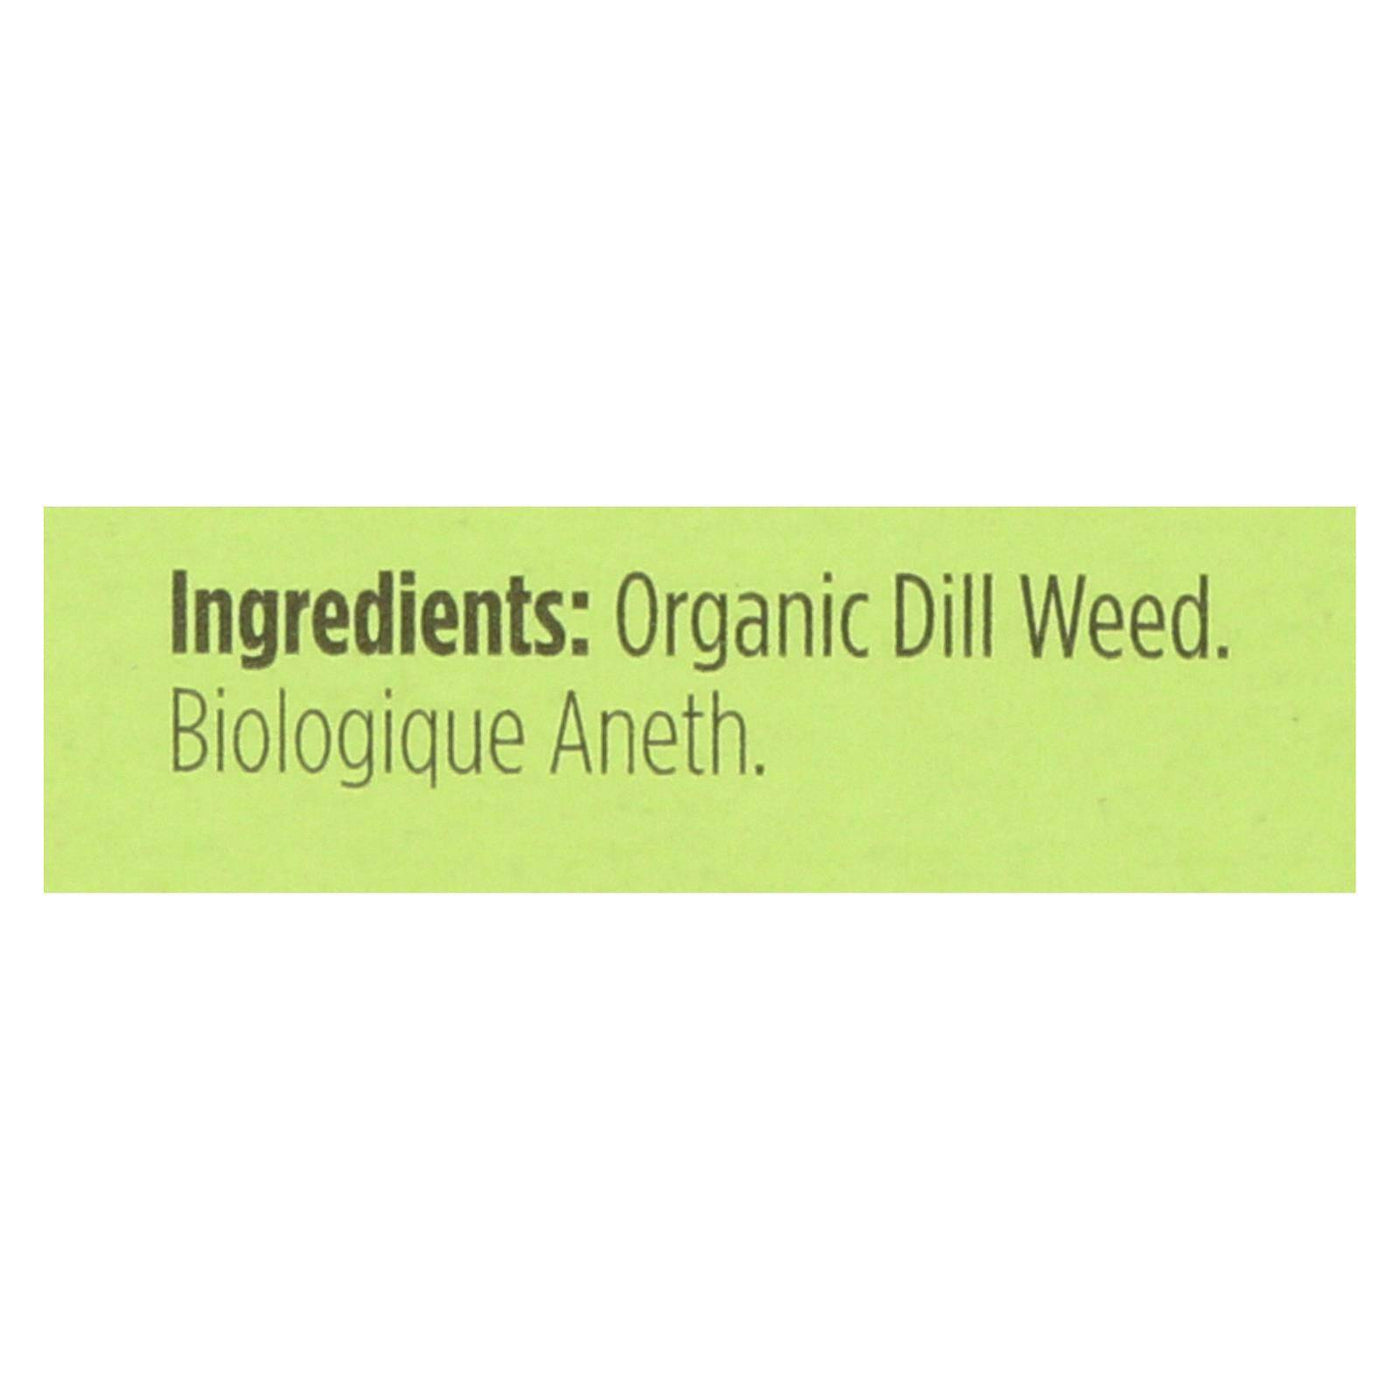 Buy Spicely Organics - Organic Dill Weed - Case Of 6 - 0.1 Oz.  at OnlyNaturals.us